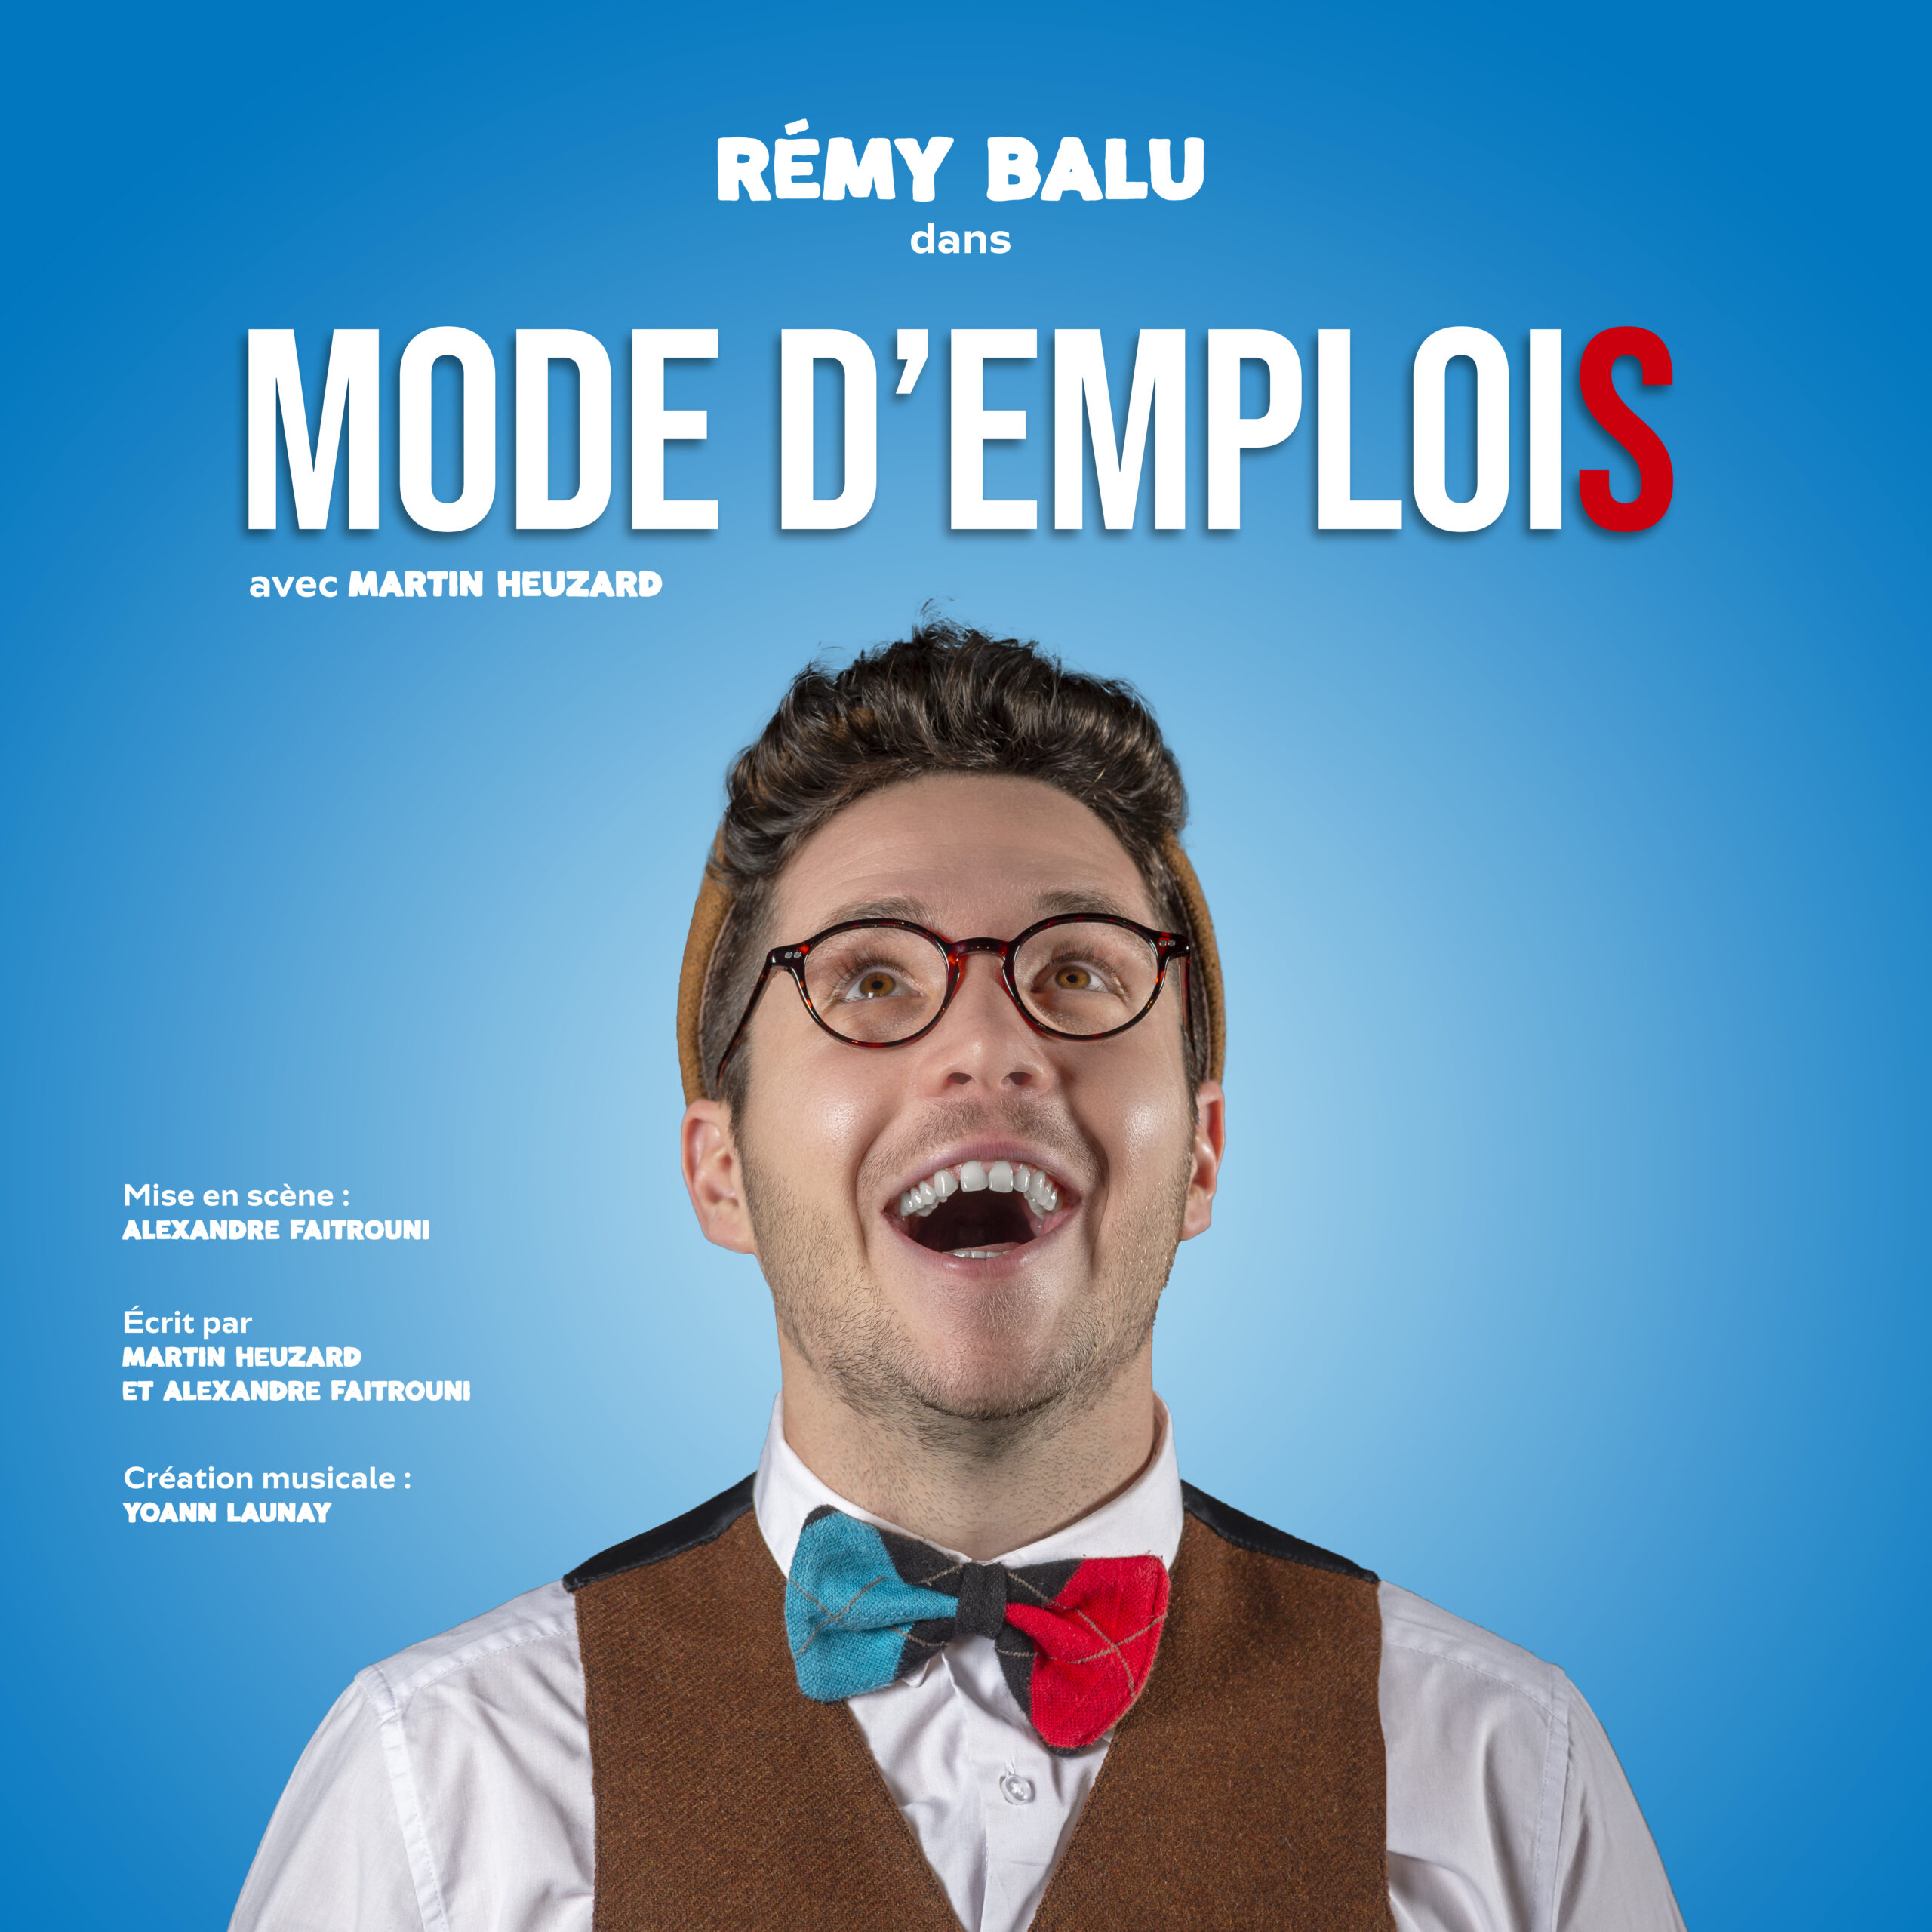 Fiche Spectacle – Remy Balu